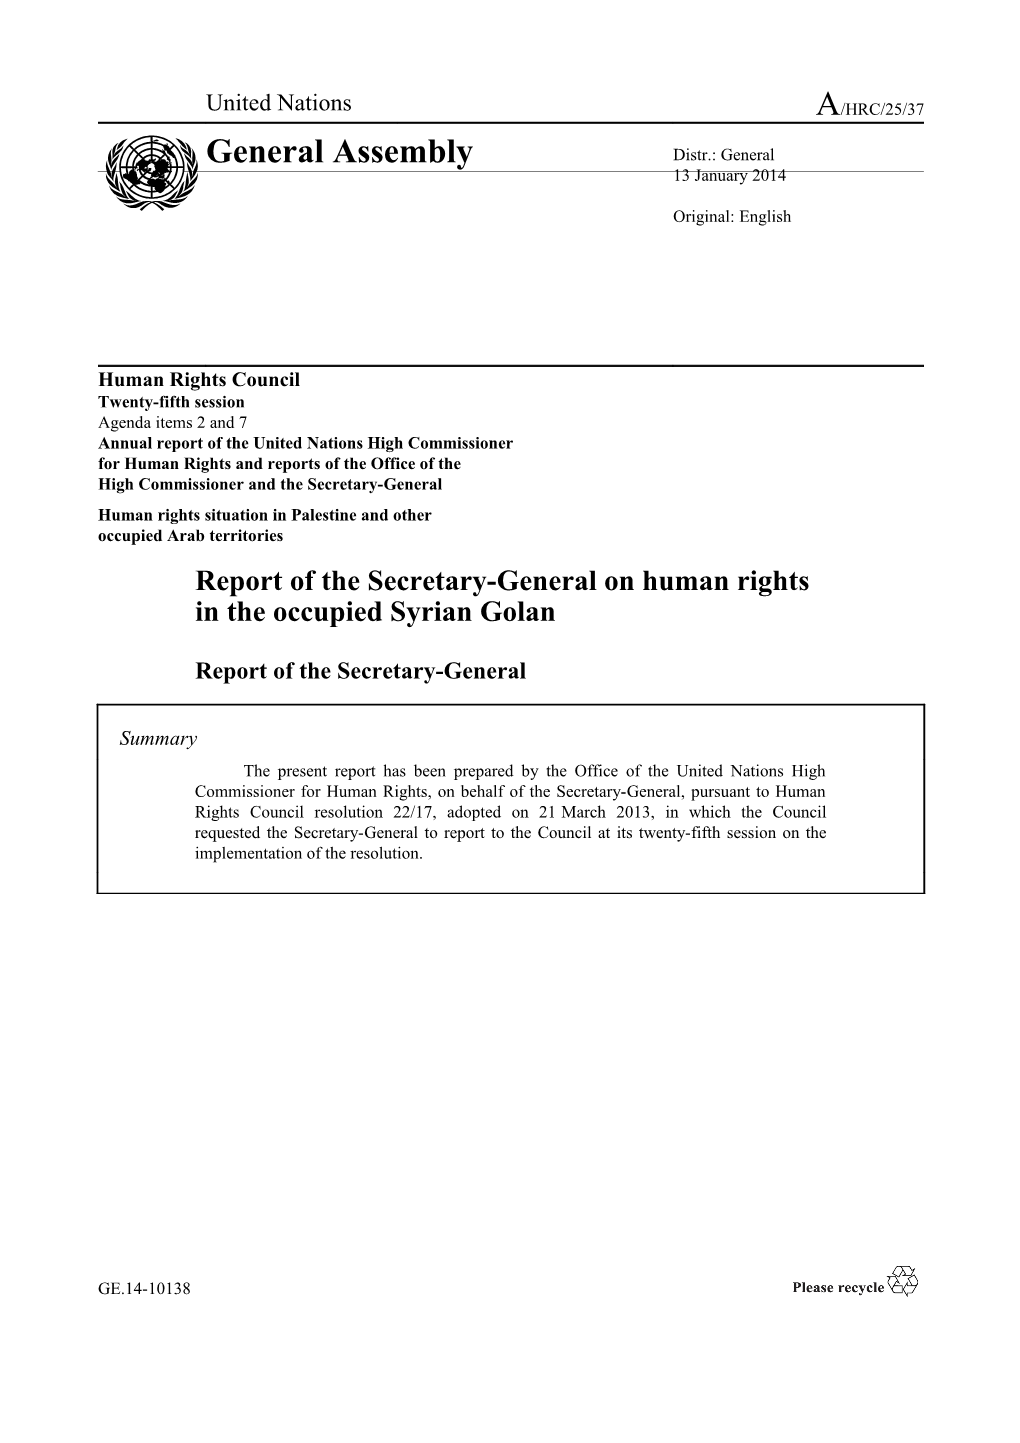 Report of the Secretary-General on Human Rights in the Occupied Syrian Golan in English